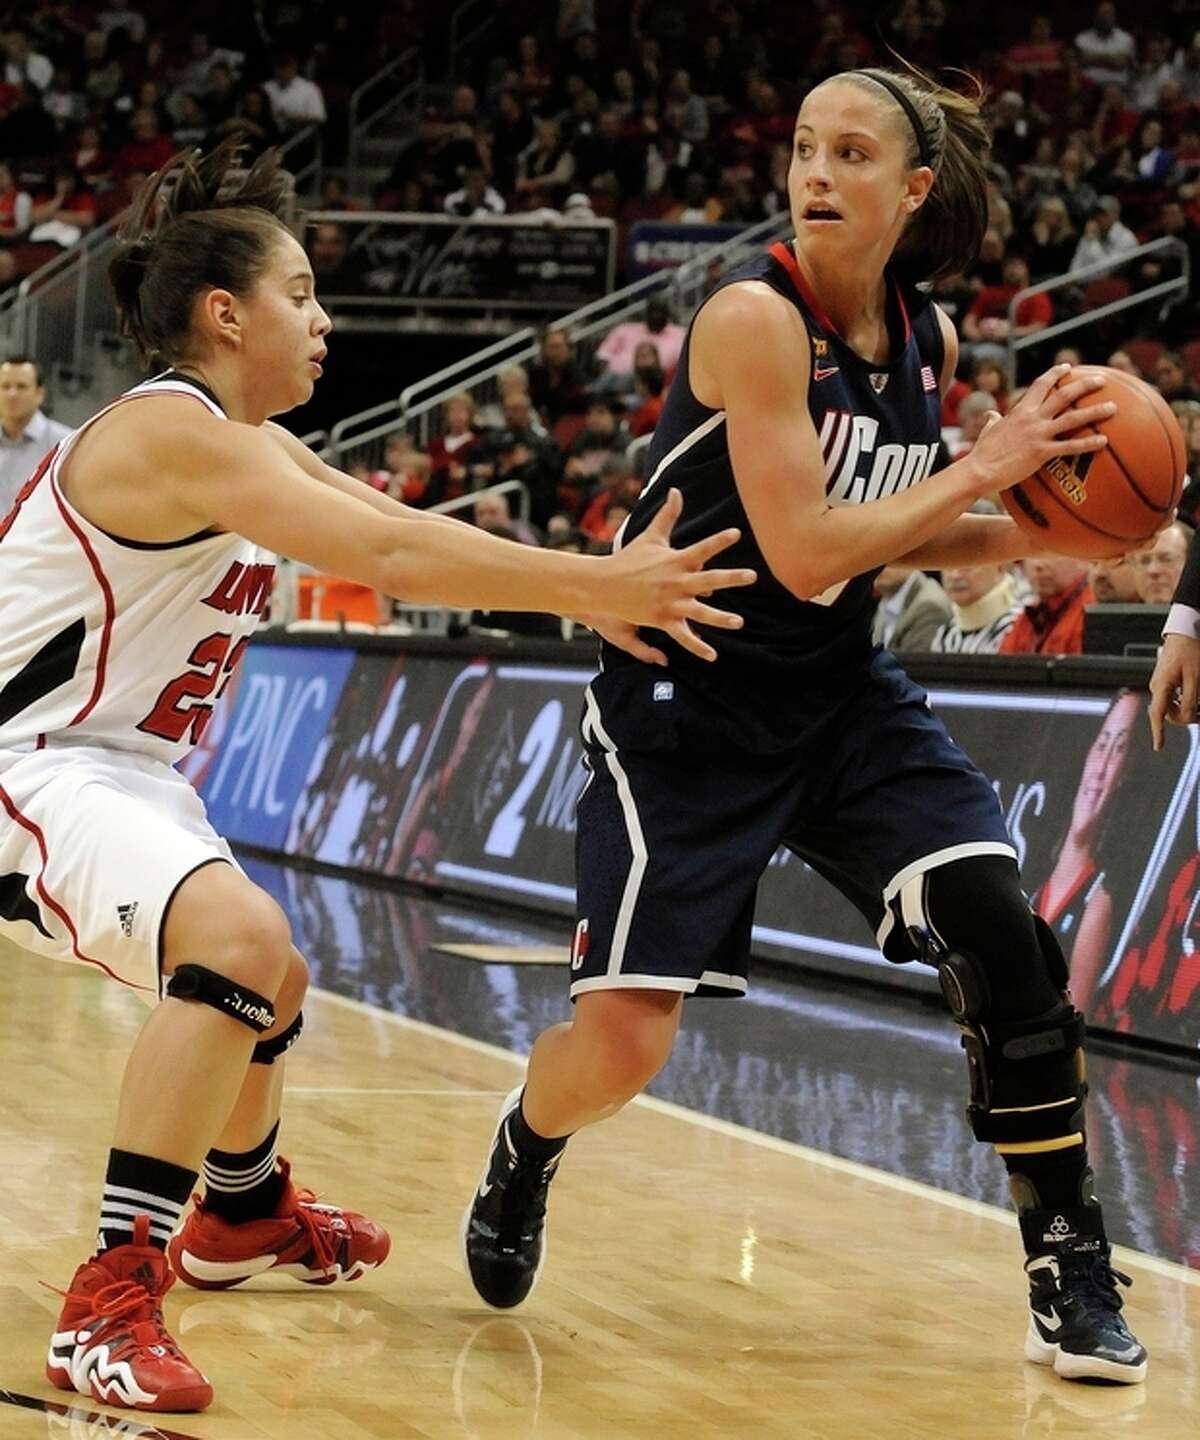 Connecticut's Caroline Doty, right, looks for an opening around Louisville's Shoni Schimmel during the second half of their NCAA college basketball game Tuesday, Feb. 7, 2012 in Louisville, Ky. Connecticut defeated Louisville 56-46. (AP Photo/Timothy D. Easley)